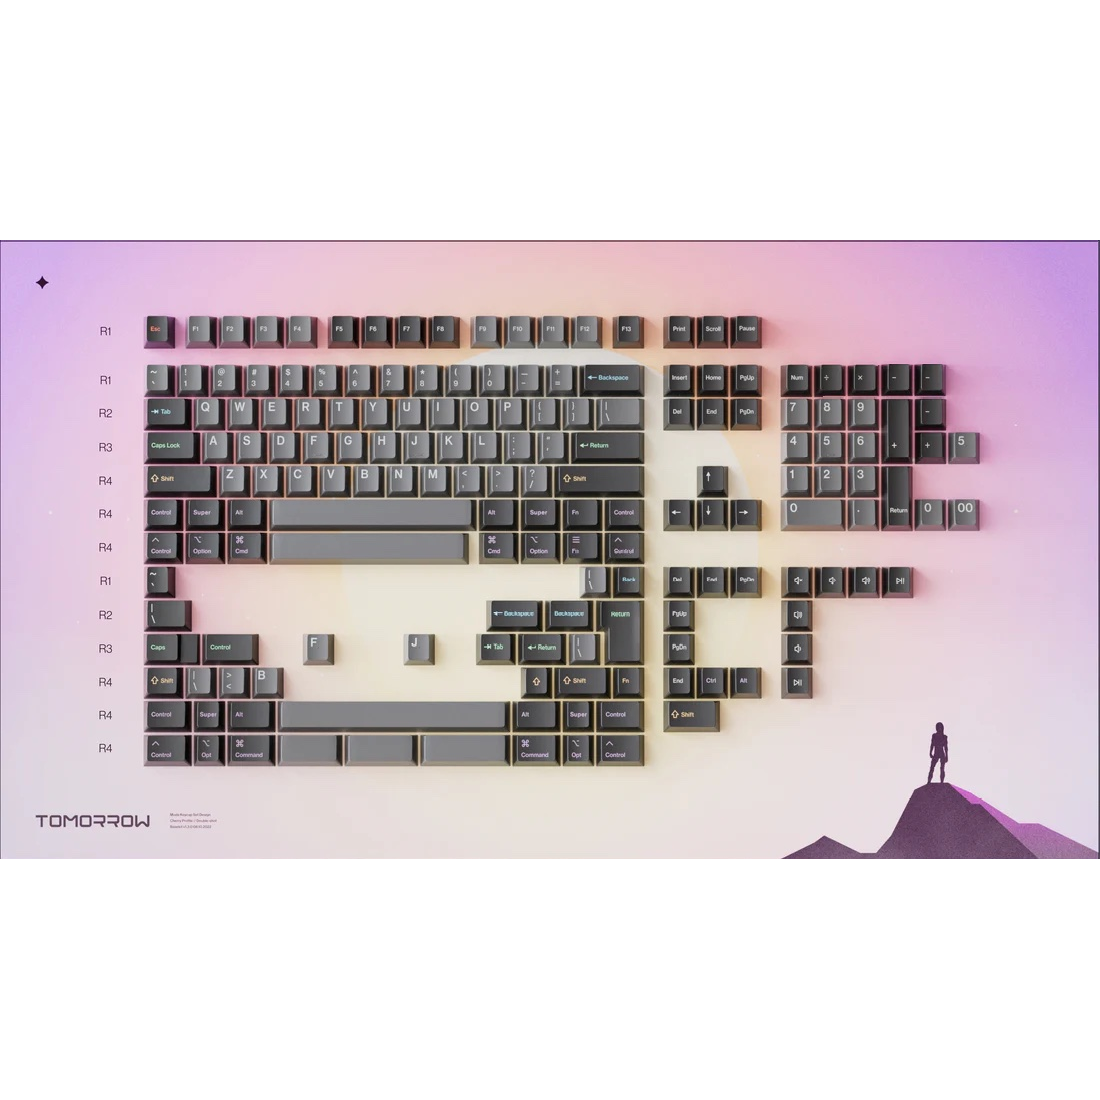 Mode Keycaps Pre-Order